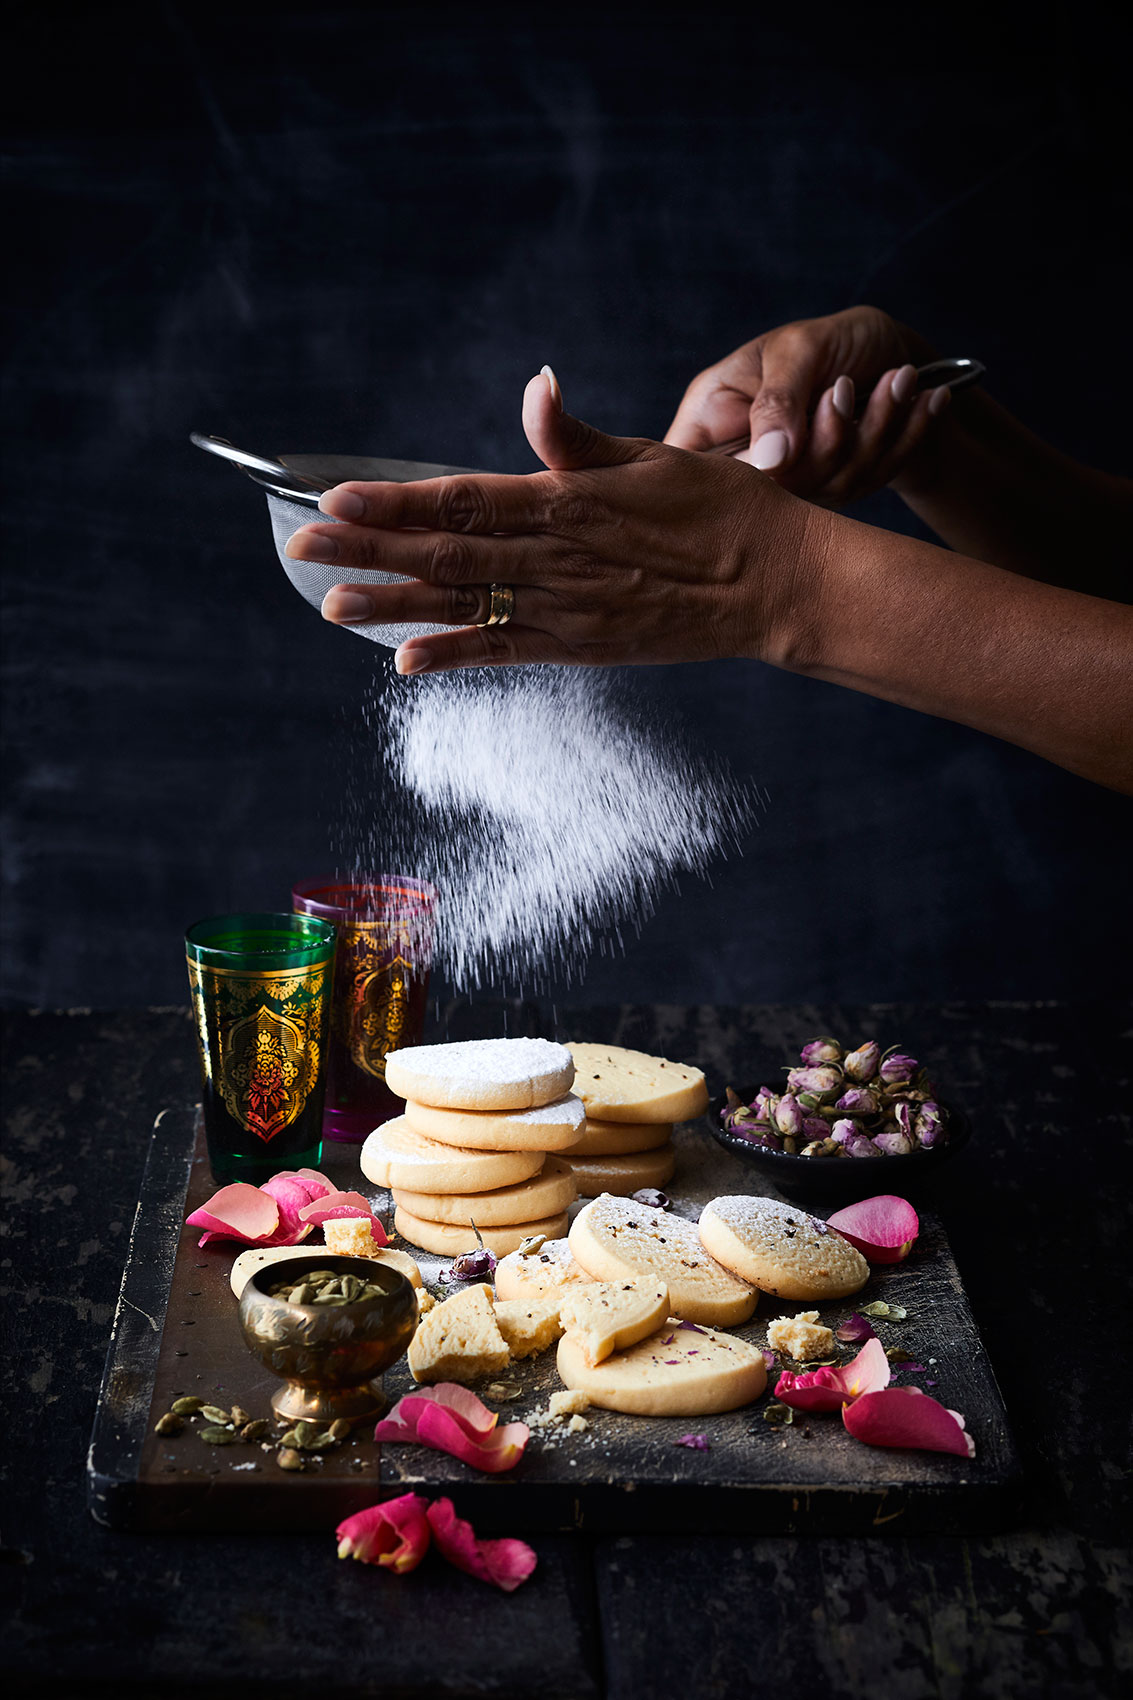 My Indian Kitchen • Icing Sugar on Cardamom Shortbread • Cookbook & Editorial Food Photography